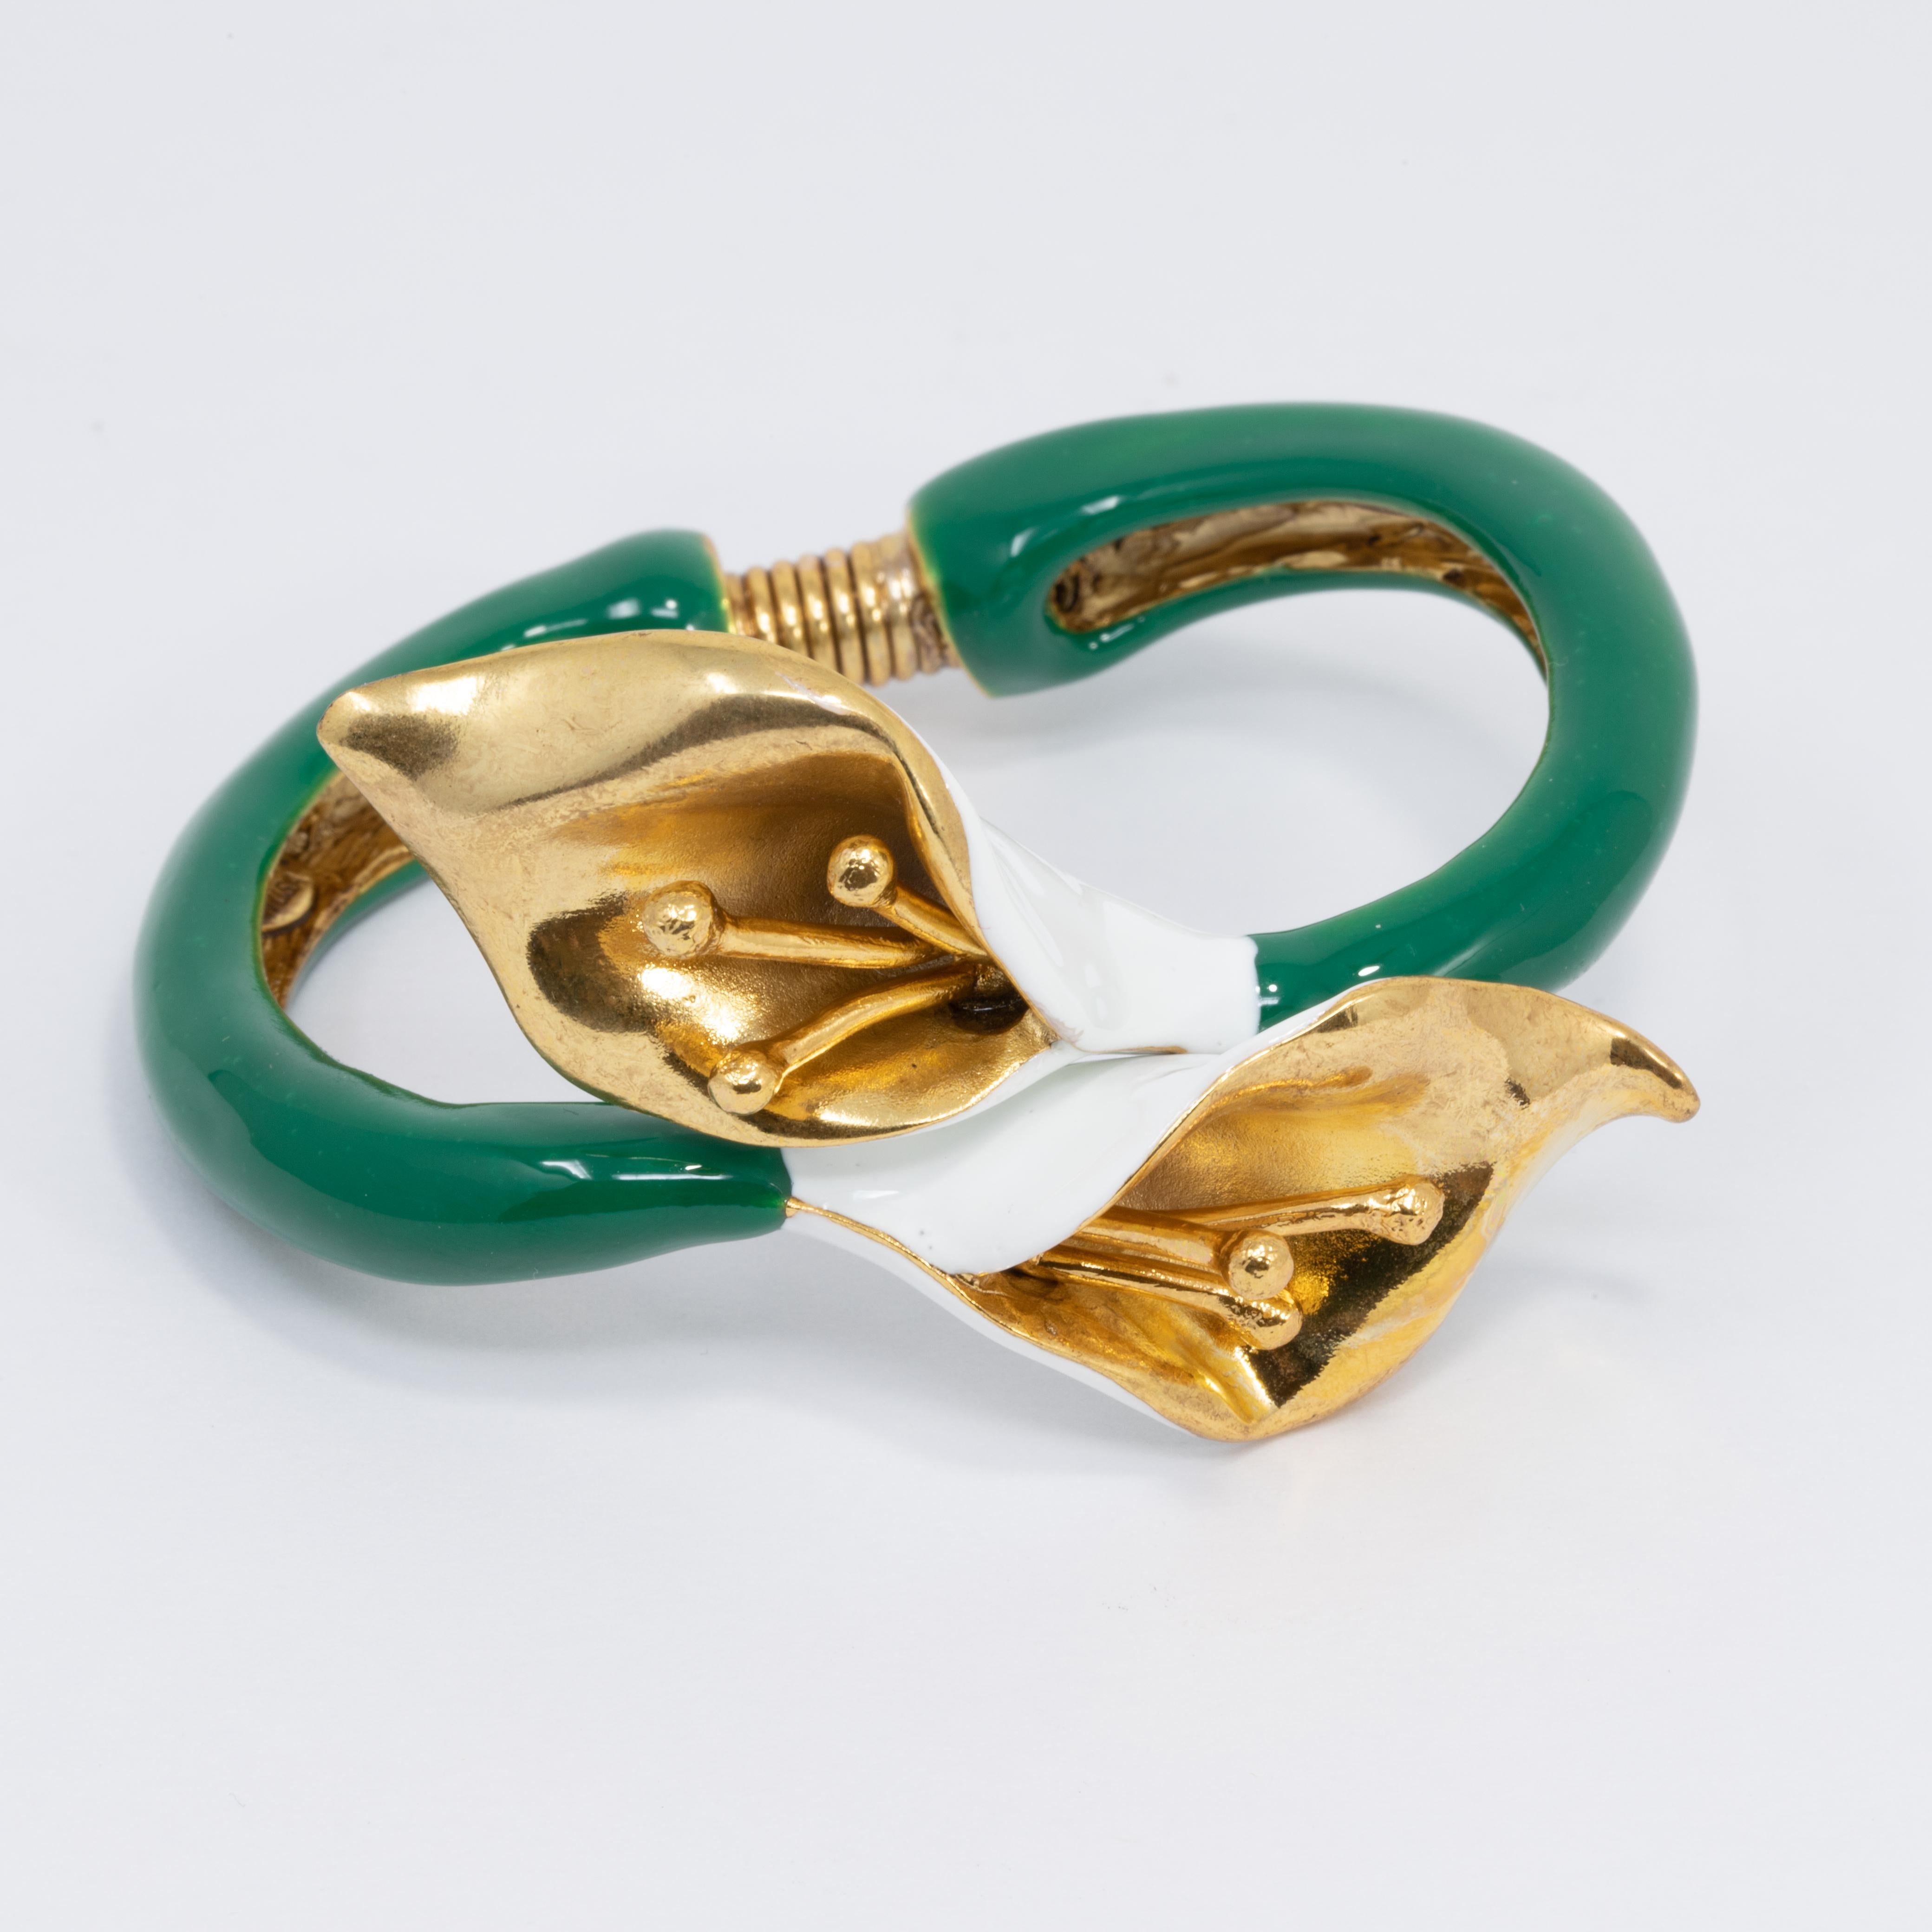 Flower chic cuff bracelet from Oscar de la Renta. A white and green enamel calla lily in gold.

Gold plated.

Get the matching pin and ring!

Tags, Marks, Hallmarks: Oscar de la Renta, Made in USA

Inner diameter at widest part: 5.9 cm / 2.3 in